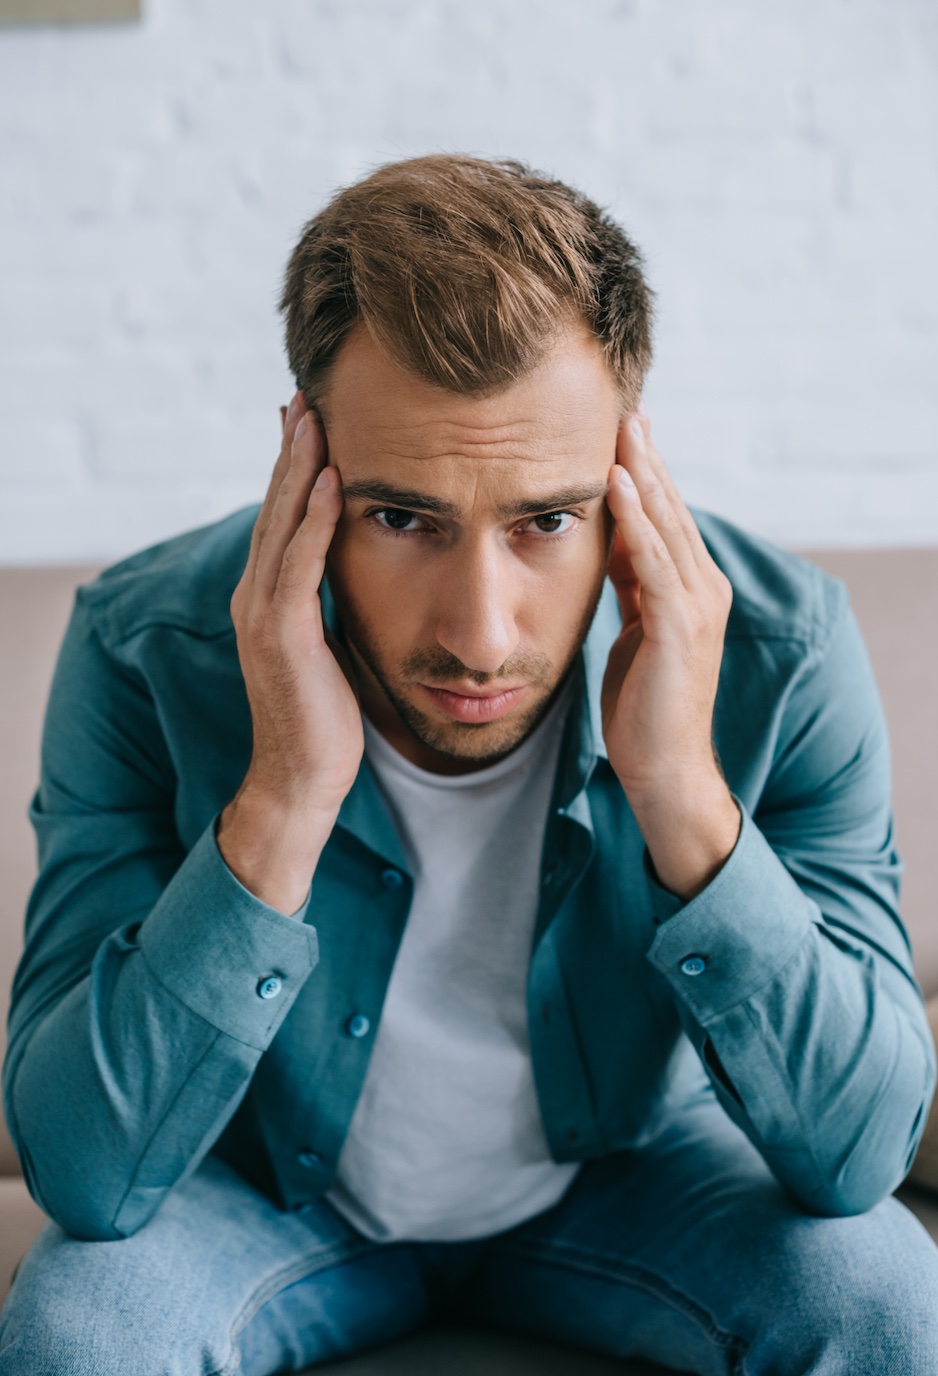 <a href="https://depositphotos.com/category/shopping.html">Young man with headache looking at camera at home - depositphotos.com</a>